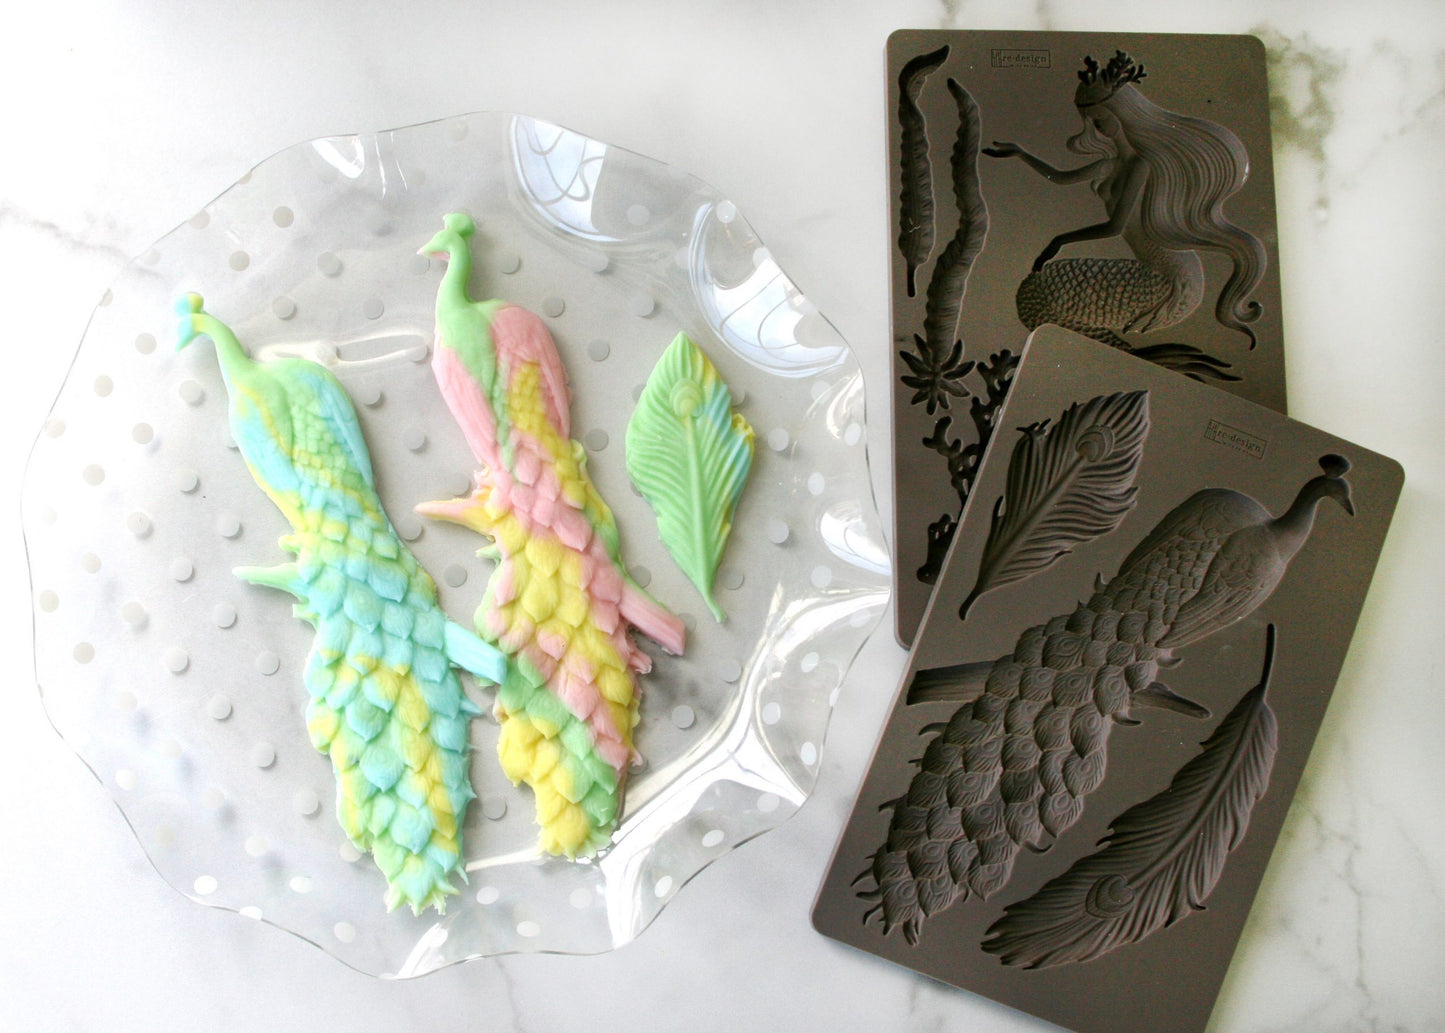 Regal Peacock ReDesign With Prima Decor Mould - Same Day Shipping - Furniture Mould - Candy Mold - Molds for Resin - Clay Mold - Bird Decor